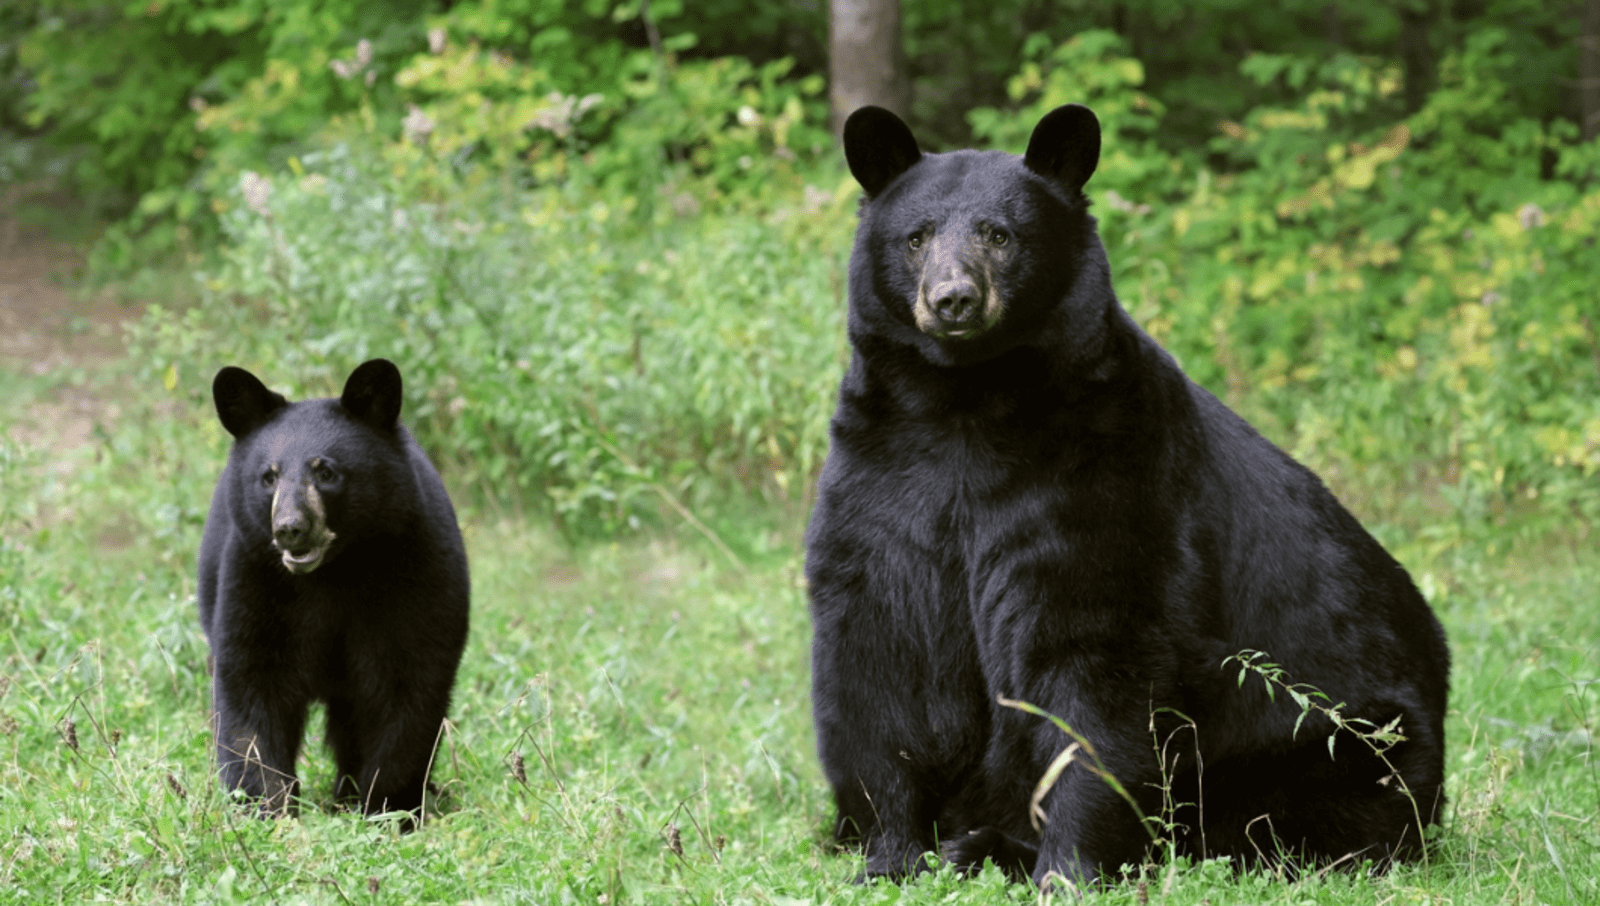 Mother Black Bear and cub sitting in green grass 